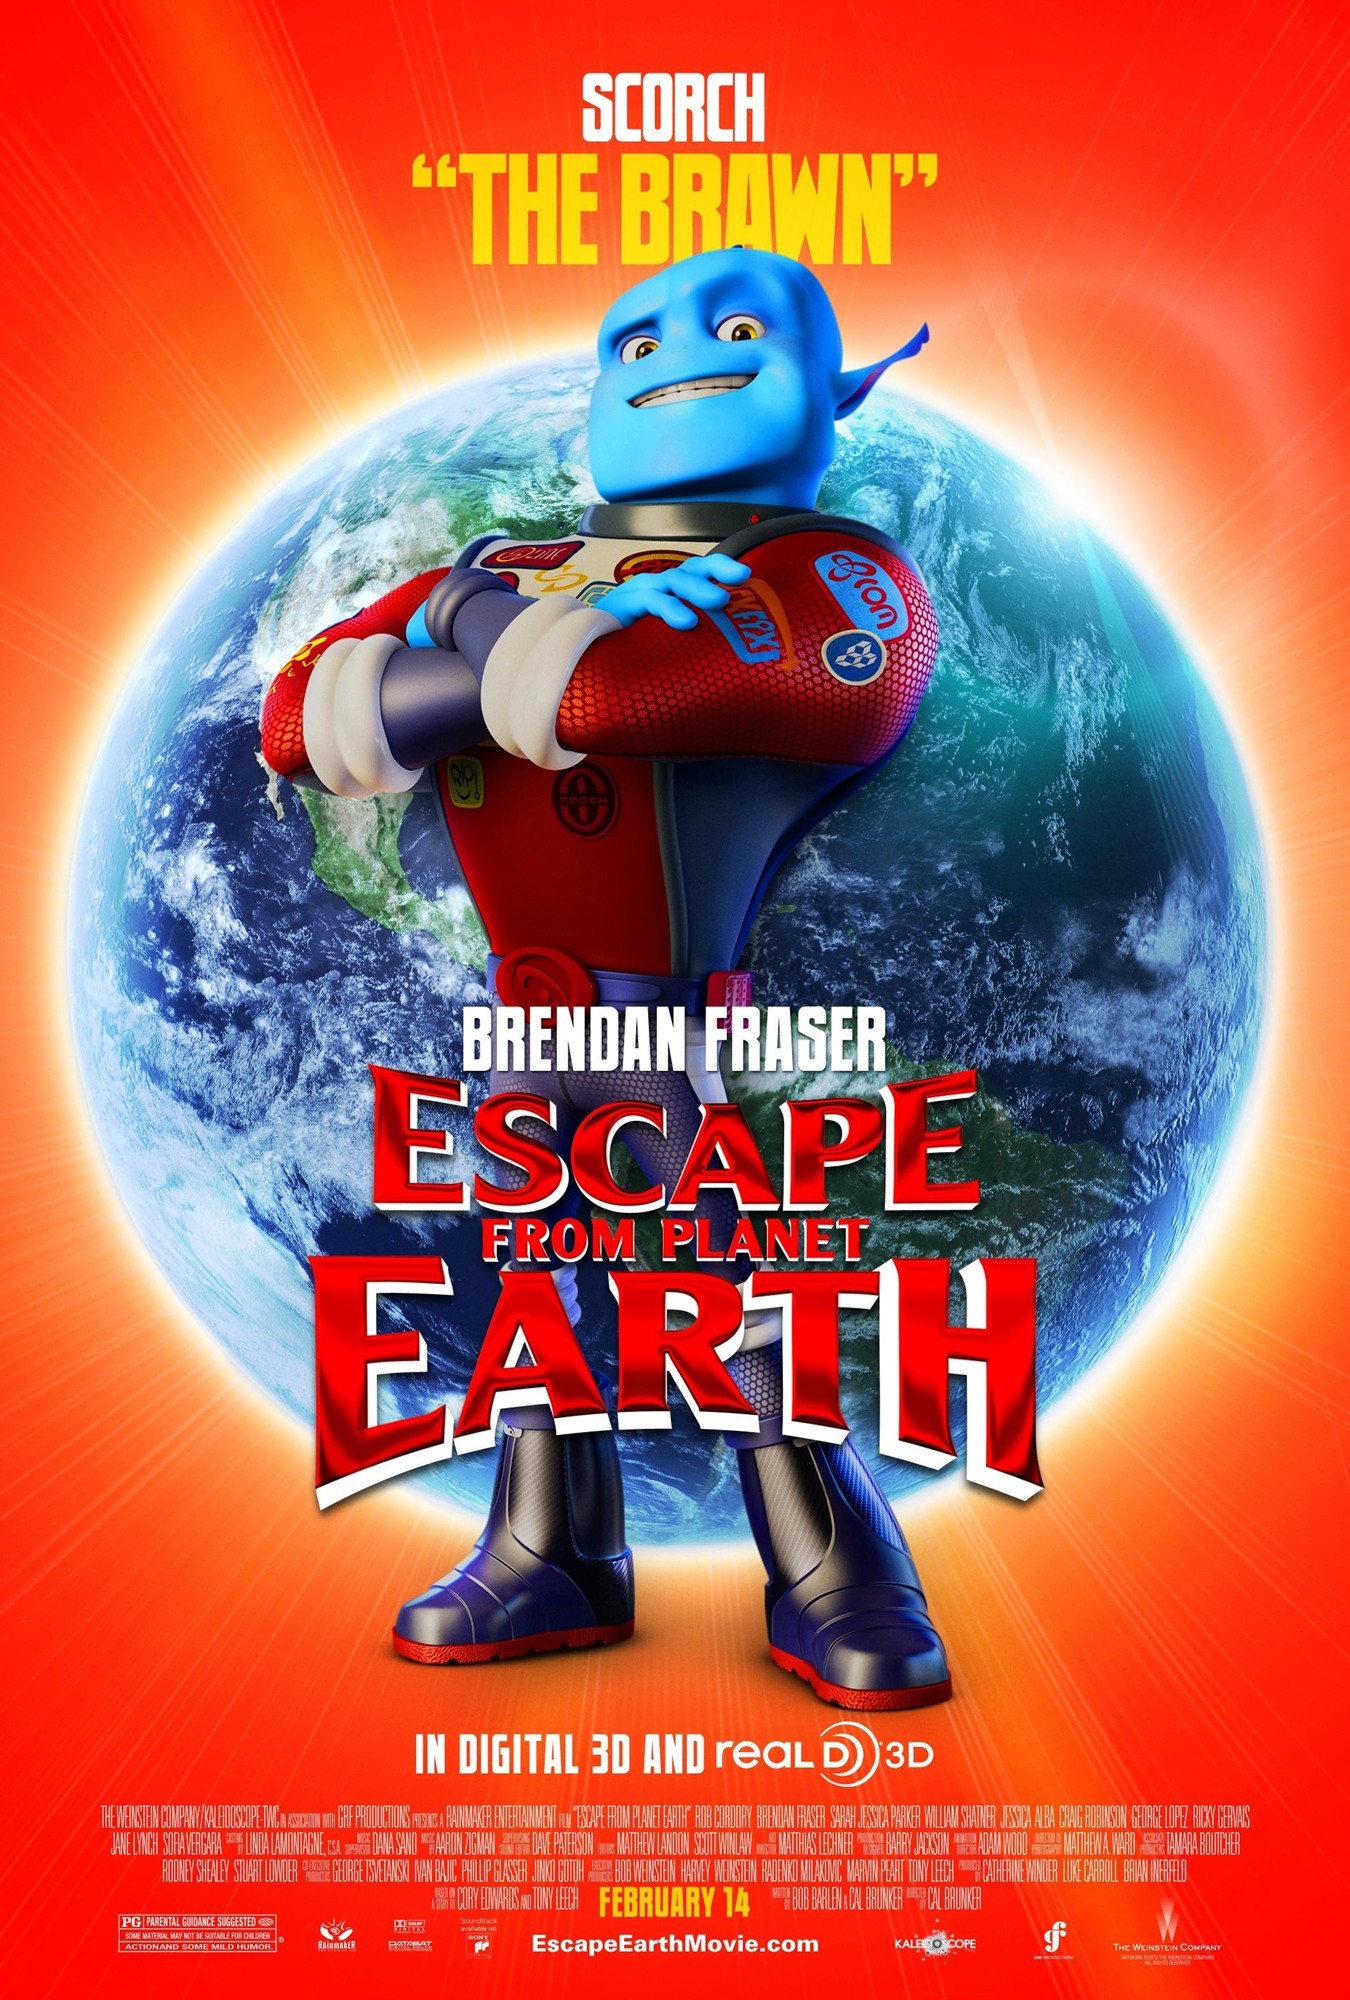 Escape From Planet Earth #4